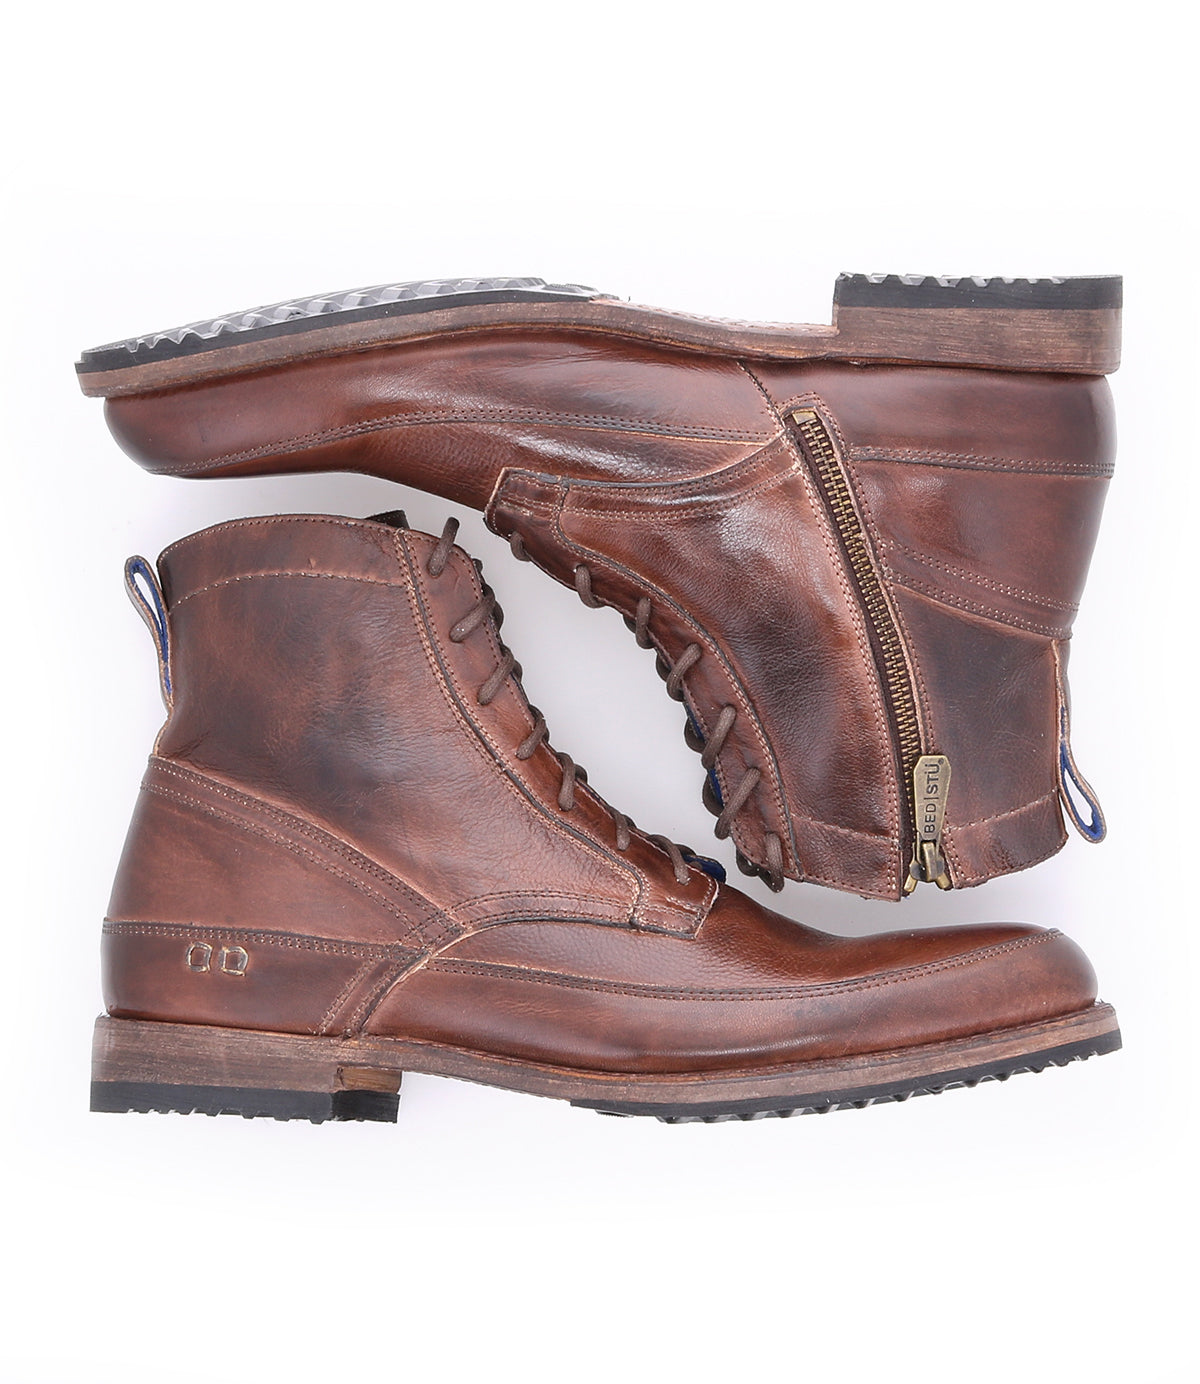 A pair of Bed Stu Spiker brown leather lace-up ankle boots with laces on one and a zipper on the other, displayed top-down on a white background.